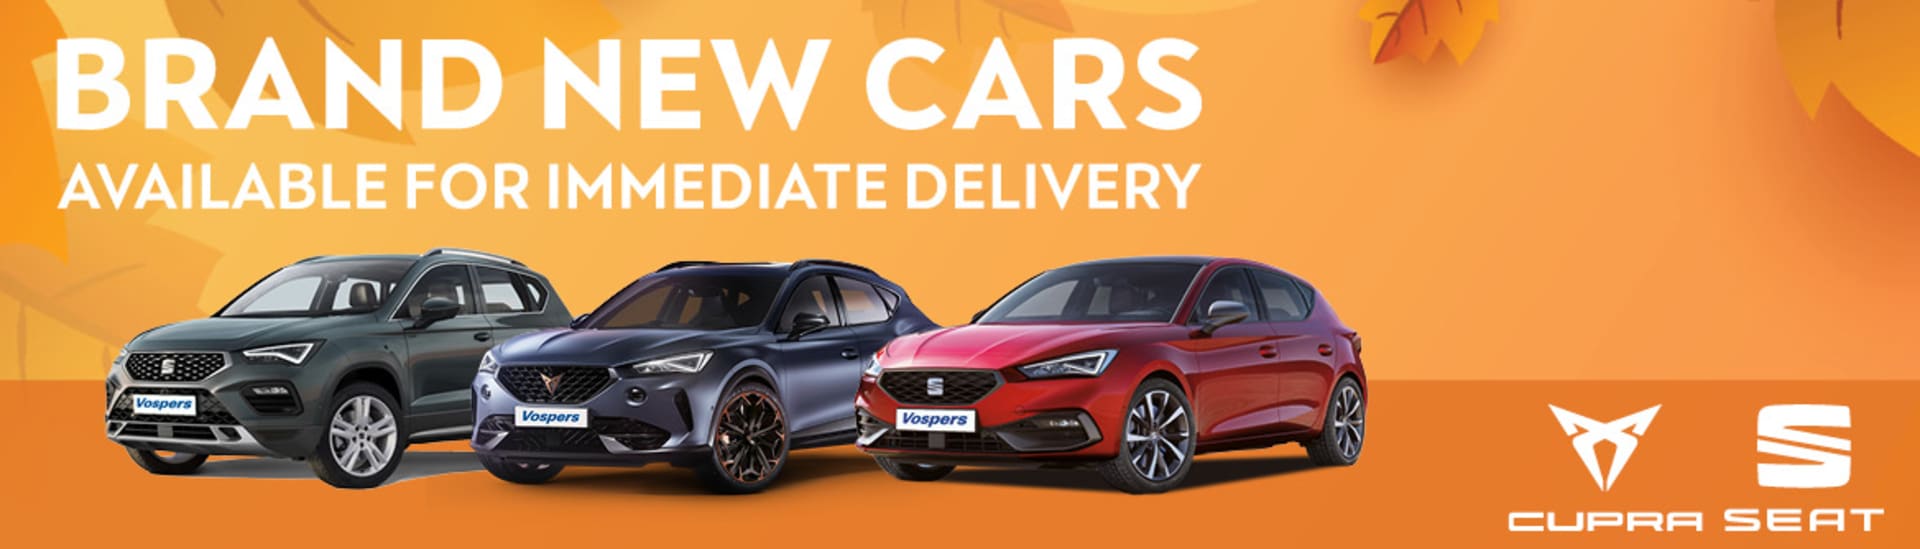 CUPRA Brand New Cars Available Now